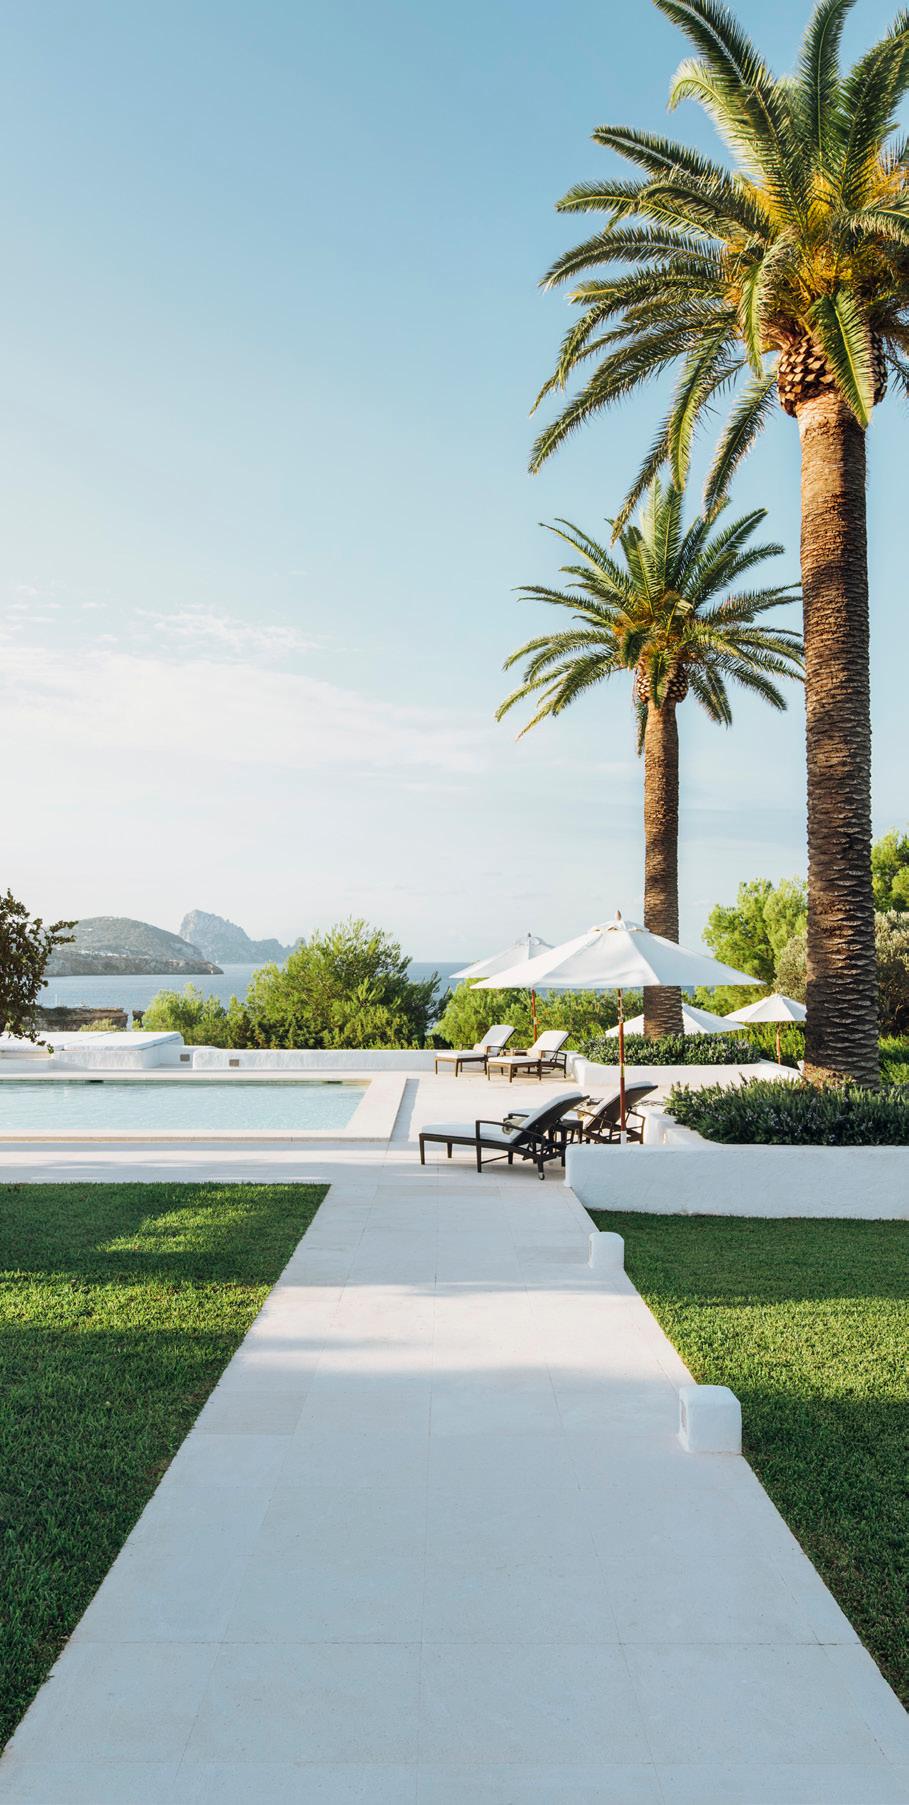 Experience the apex of sunsets & sumptuous seaside living Can Soleil is overlooking the Mediterranean Sea with the following spaces & amenities: Main villa (5 suites), Sea Villa (1 suite), Mountain